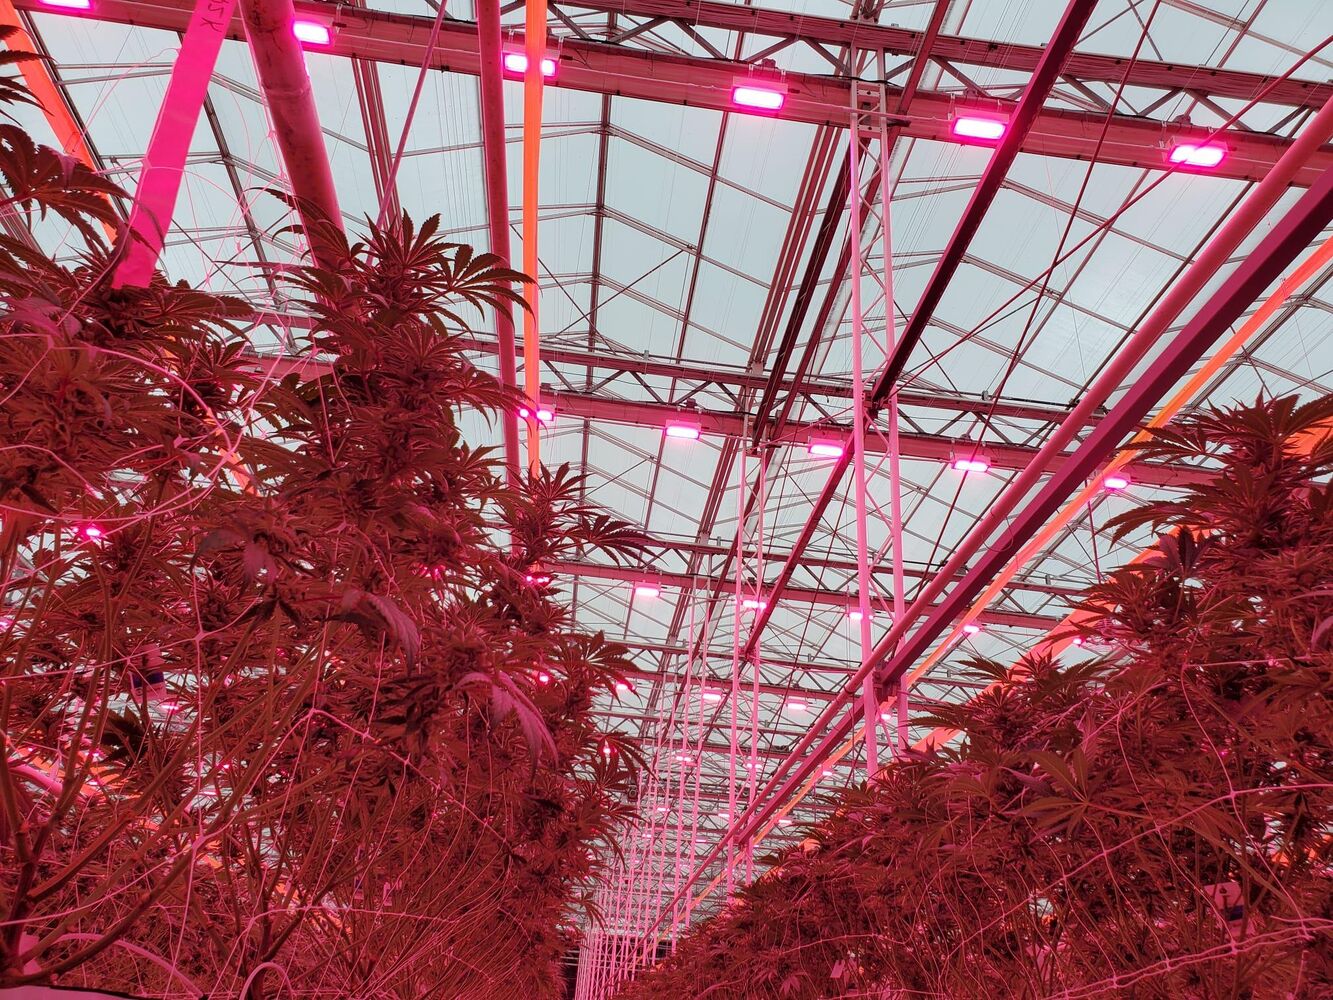 Grower uses aquifer below greenhouse for water-cooled LEDs